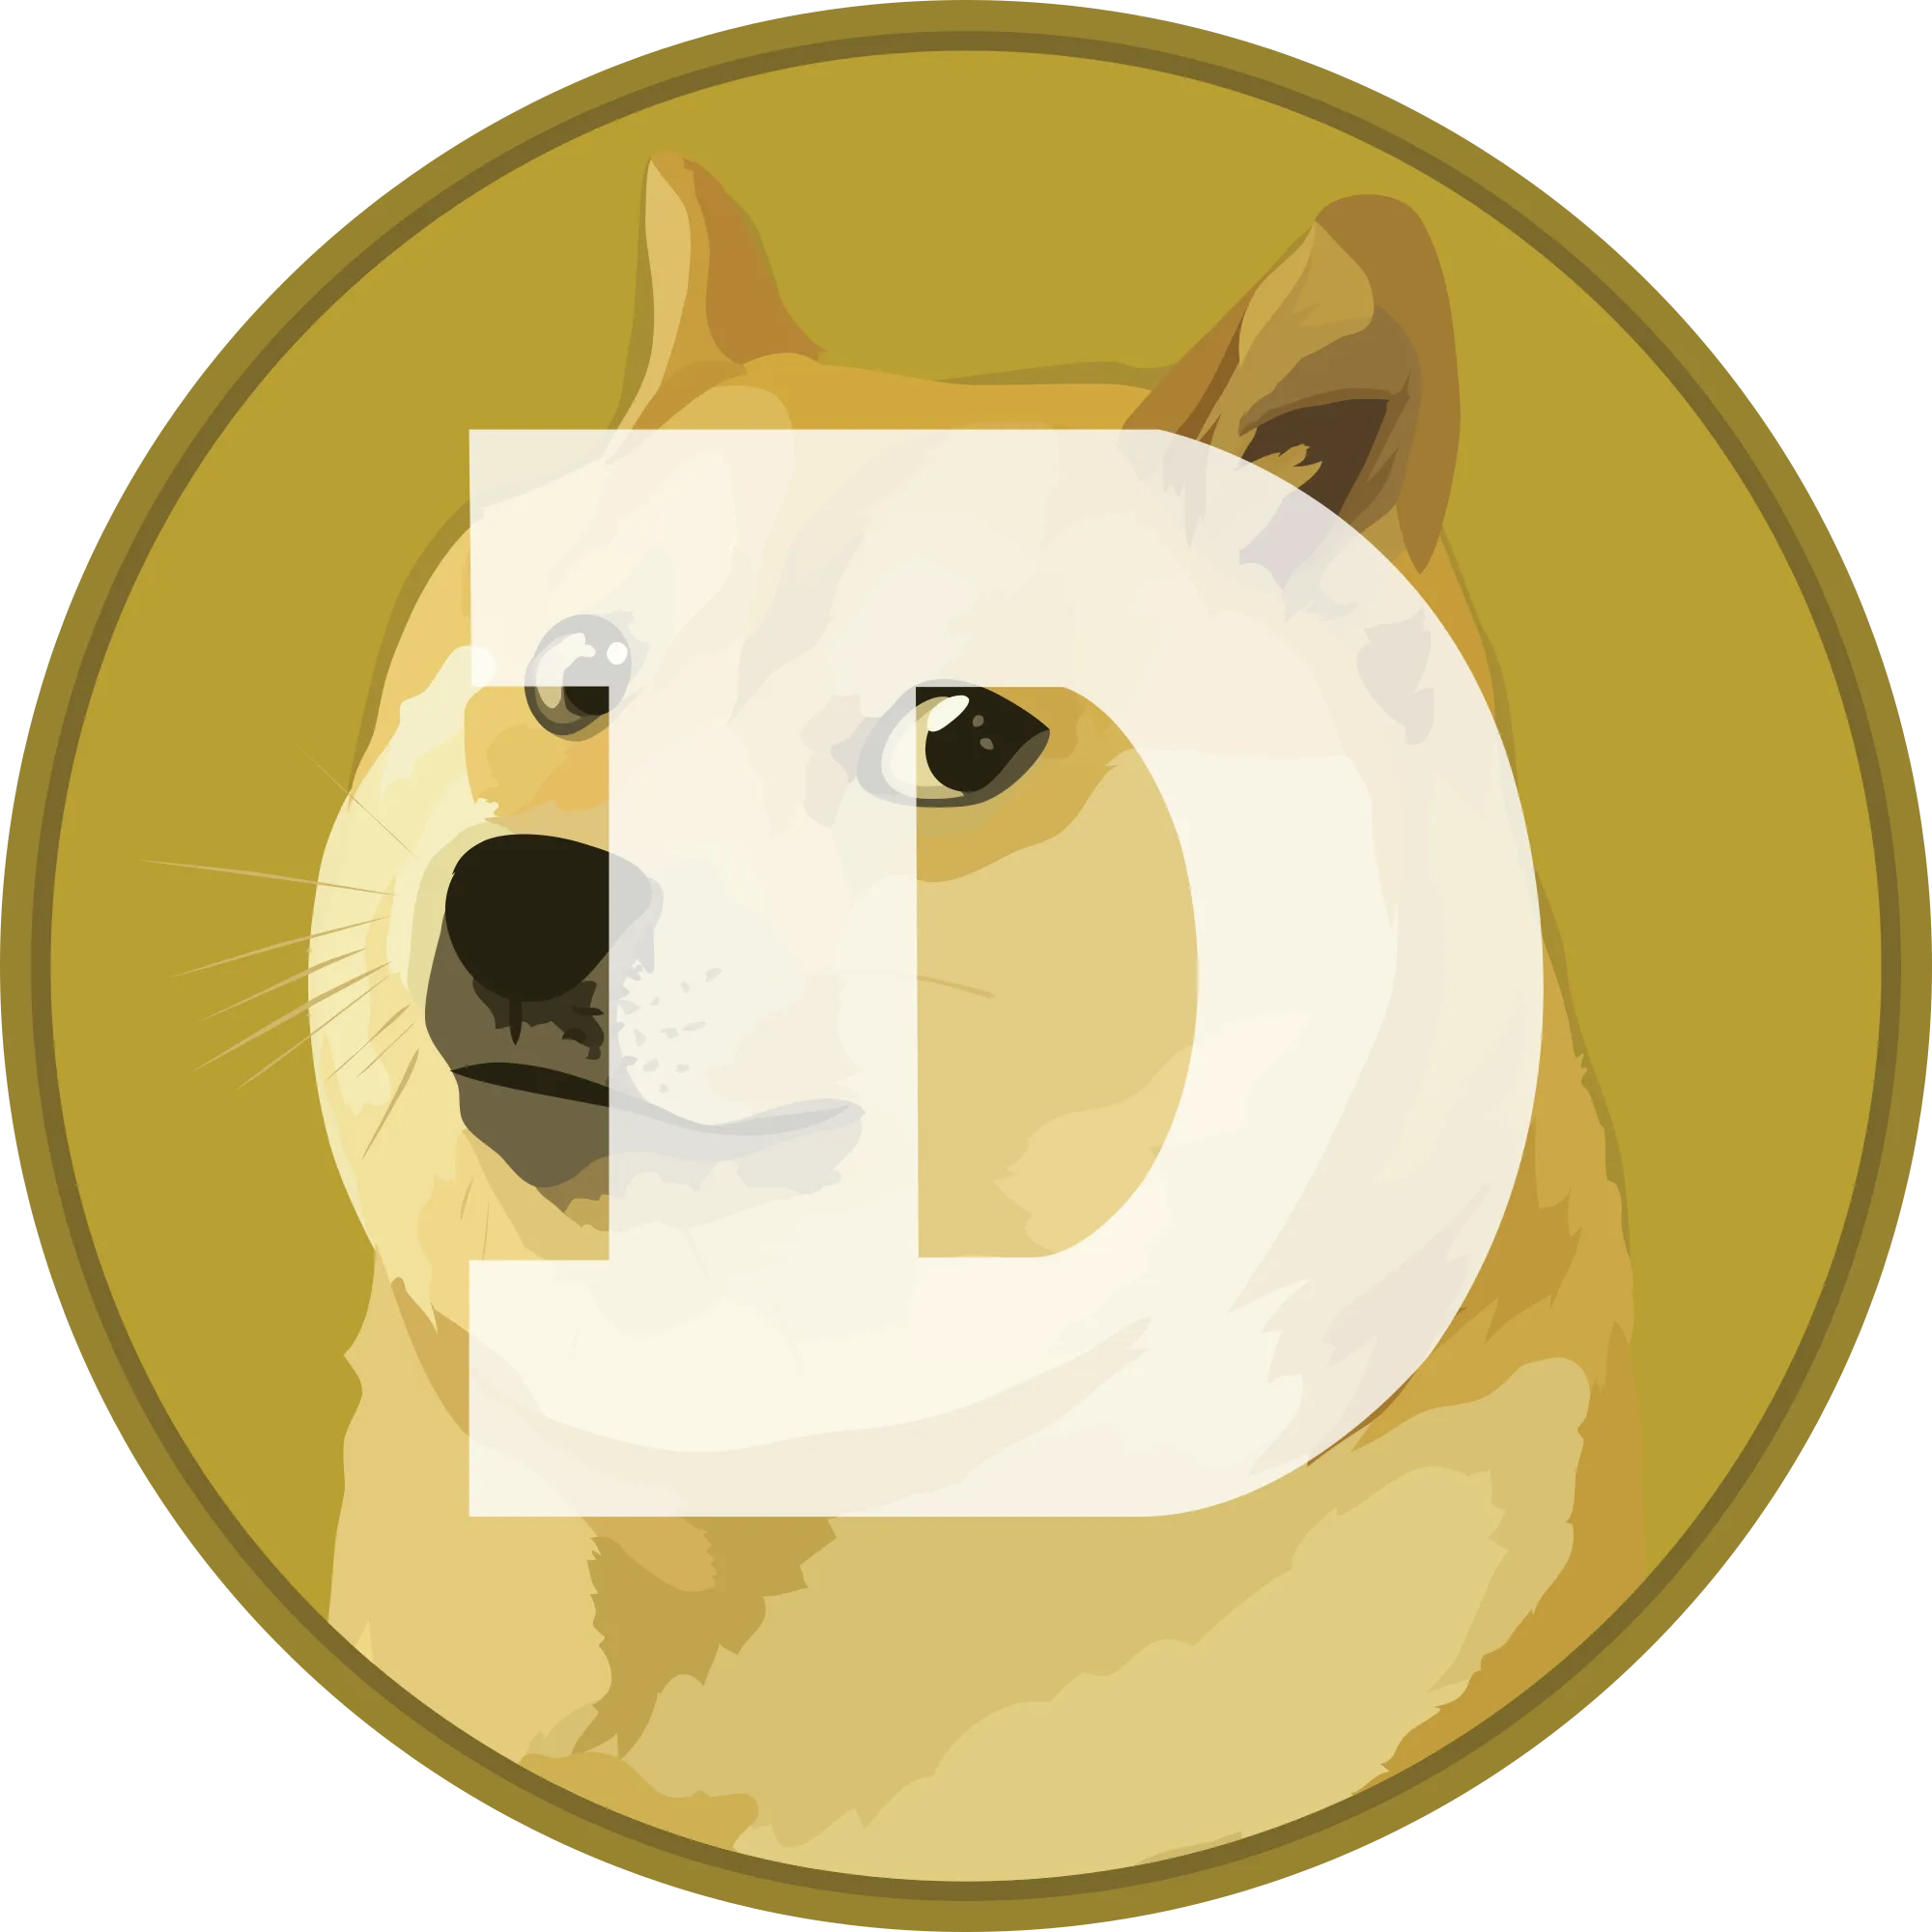 Dogecoin logo in png format